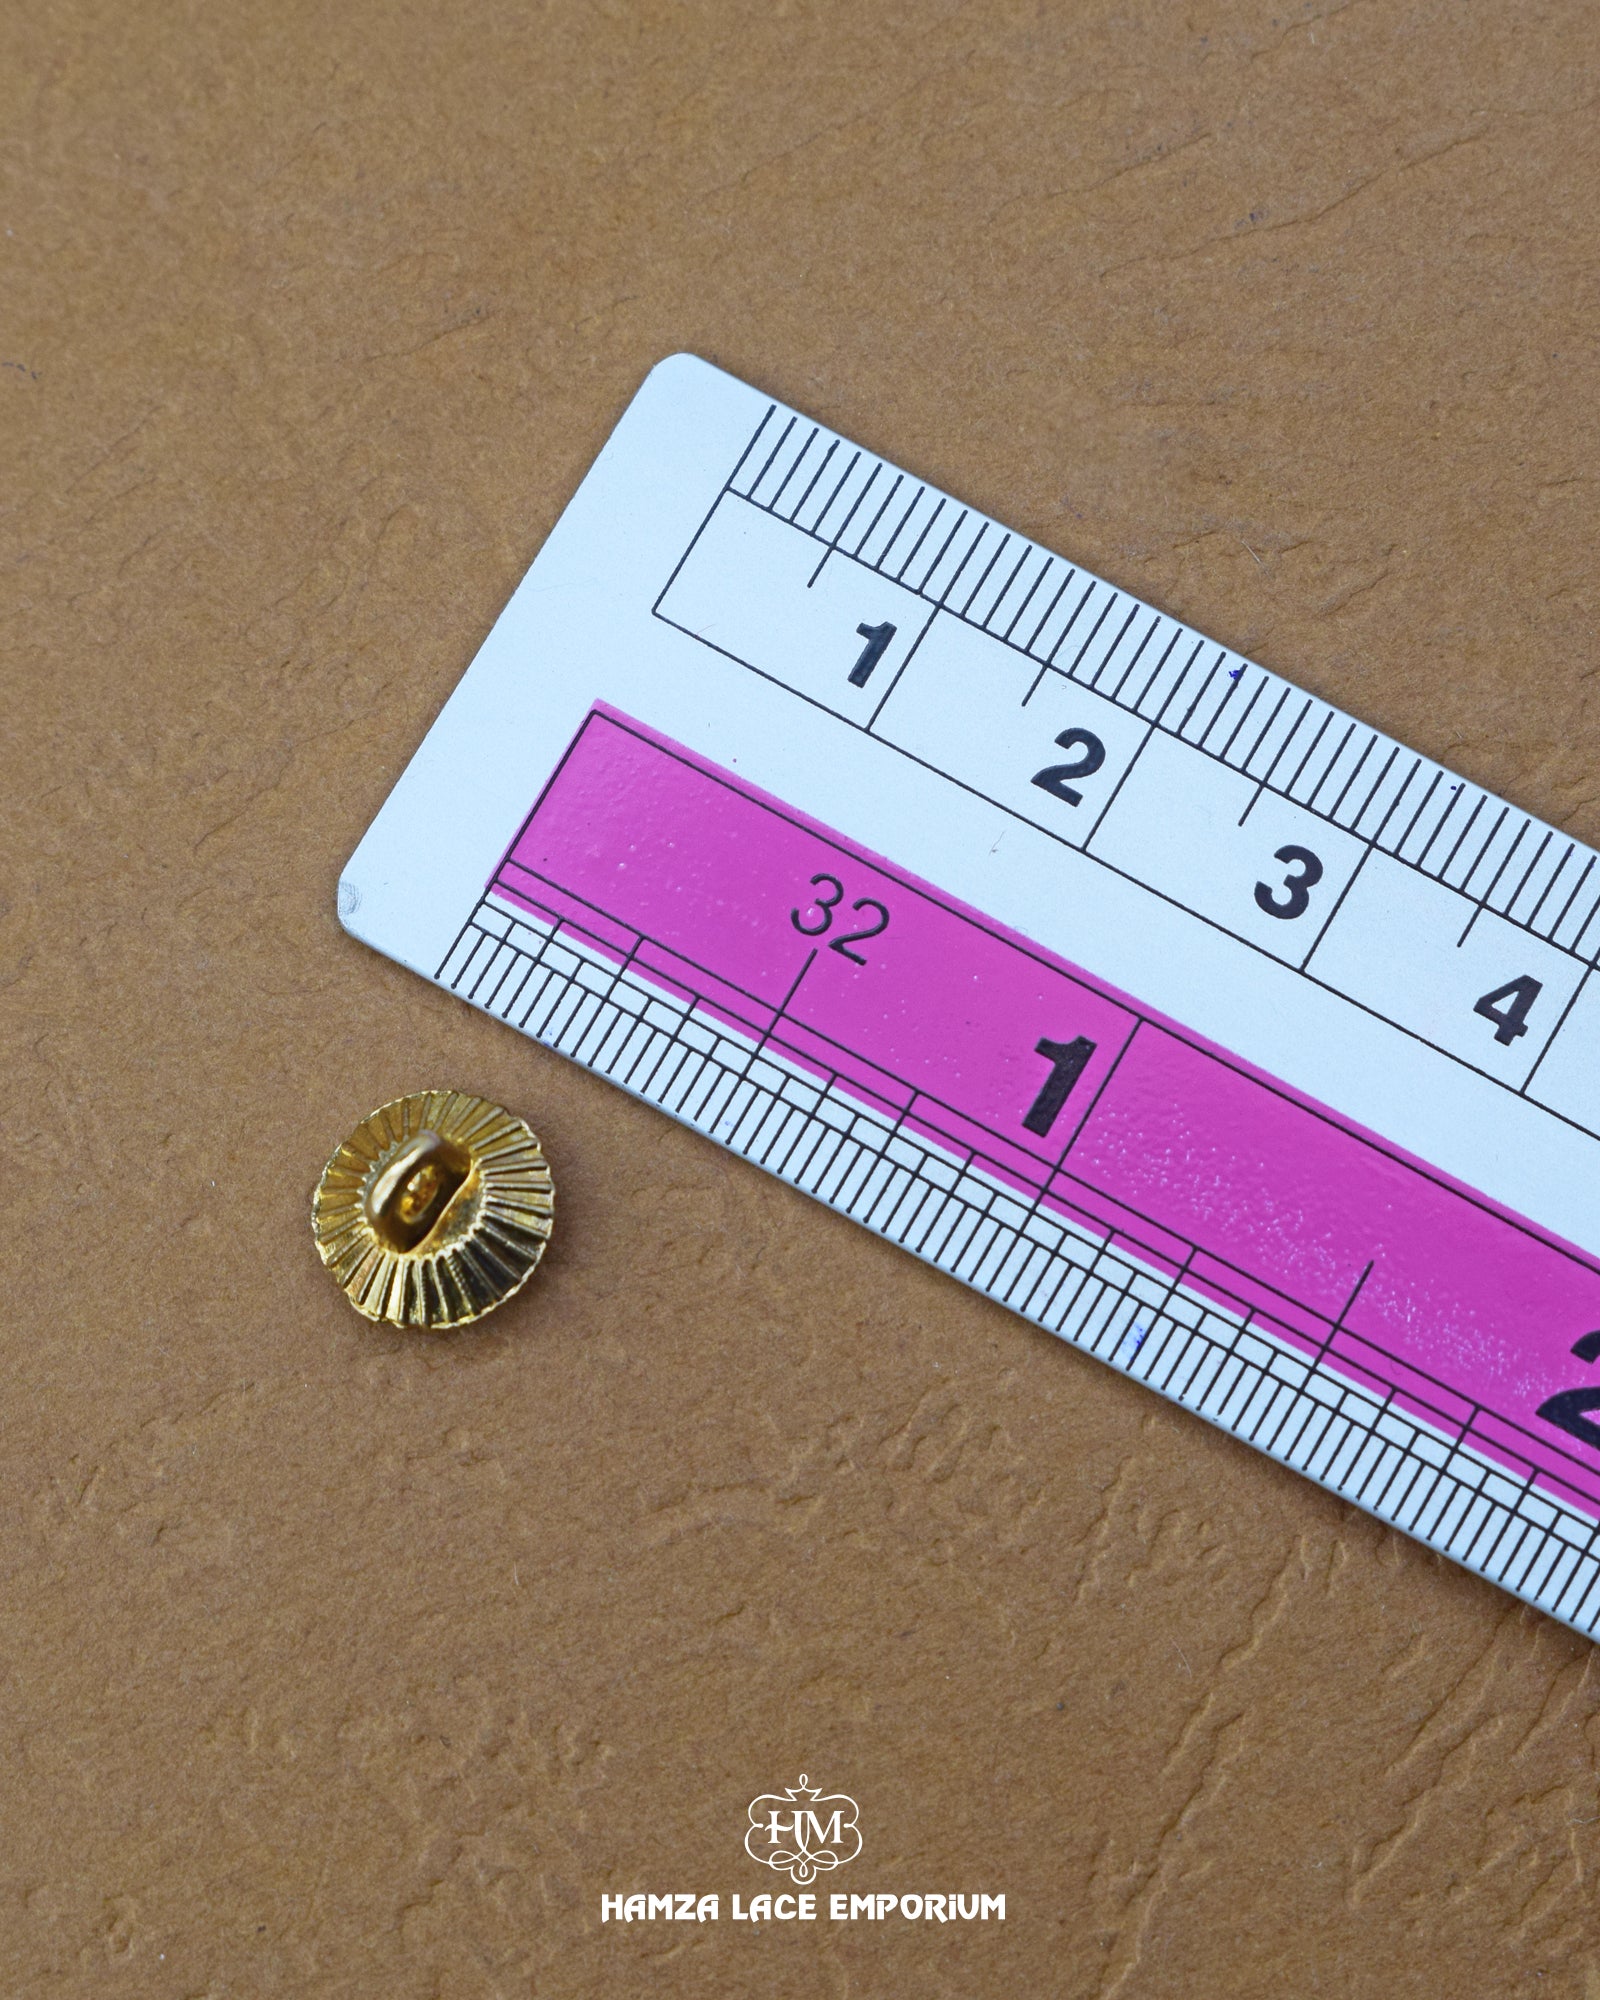 The size of the 'Golden Metal Button With White stone MB33' is measured using a ruler.